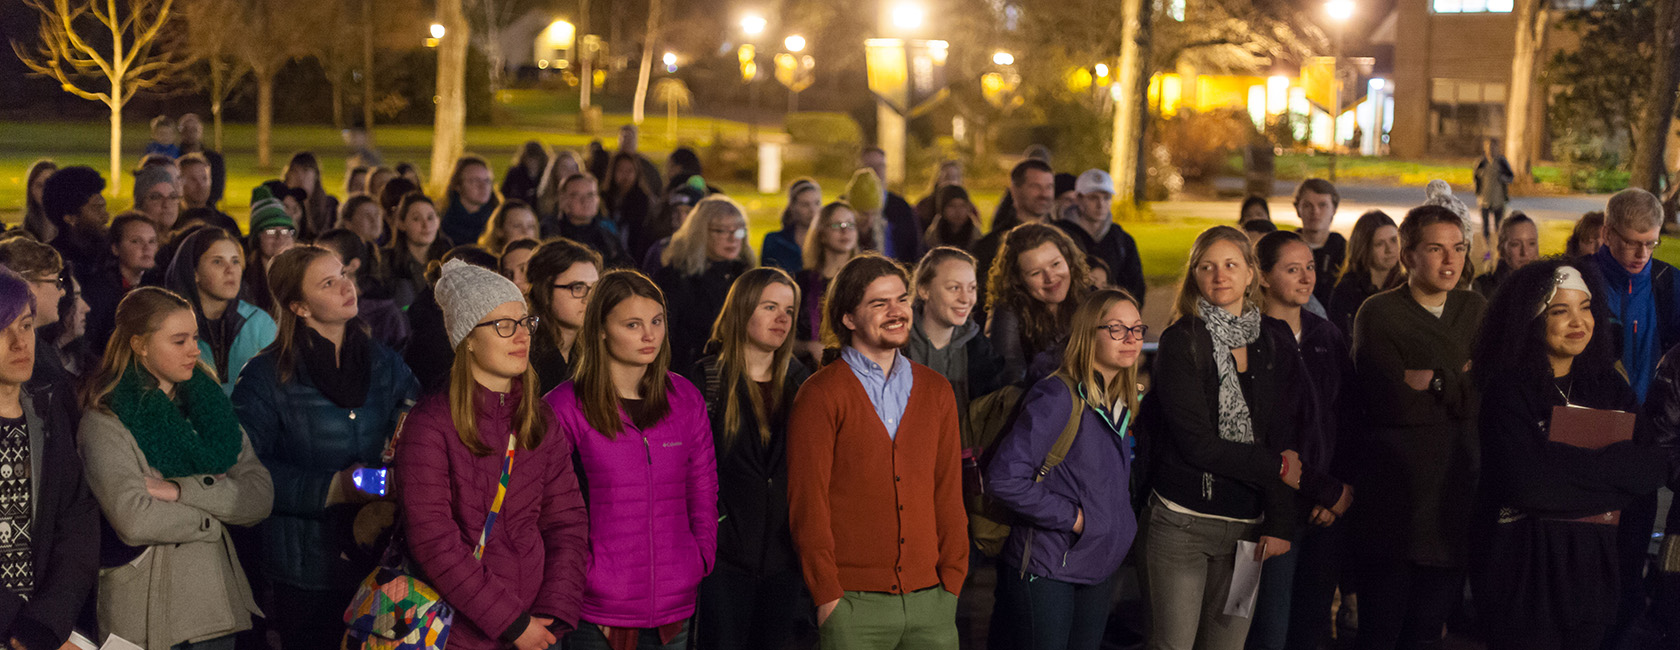 Students gather in Red Square for last year's Celebration of Light, an exploration of religious and cultural aspects of the holiday followed by singing and lighting the trees.